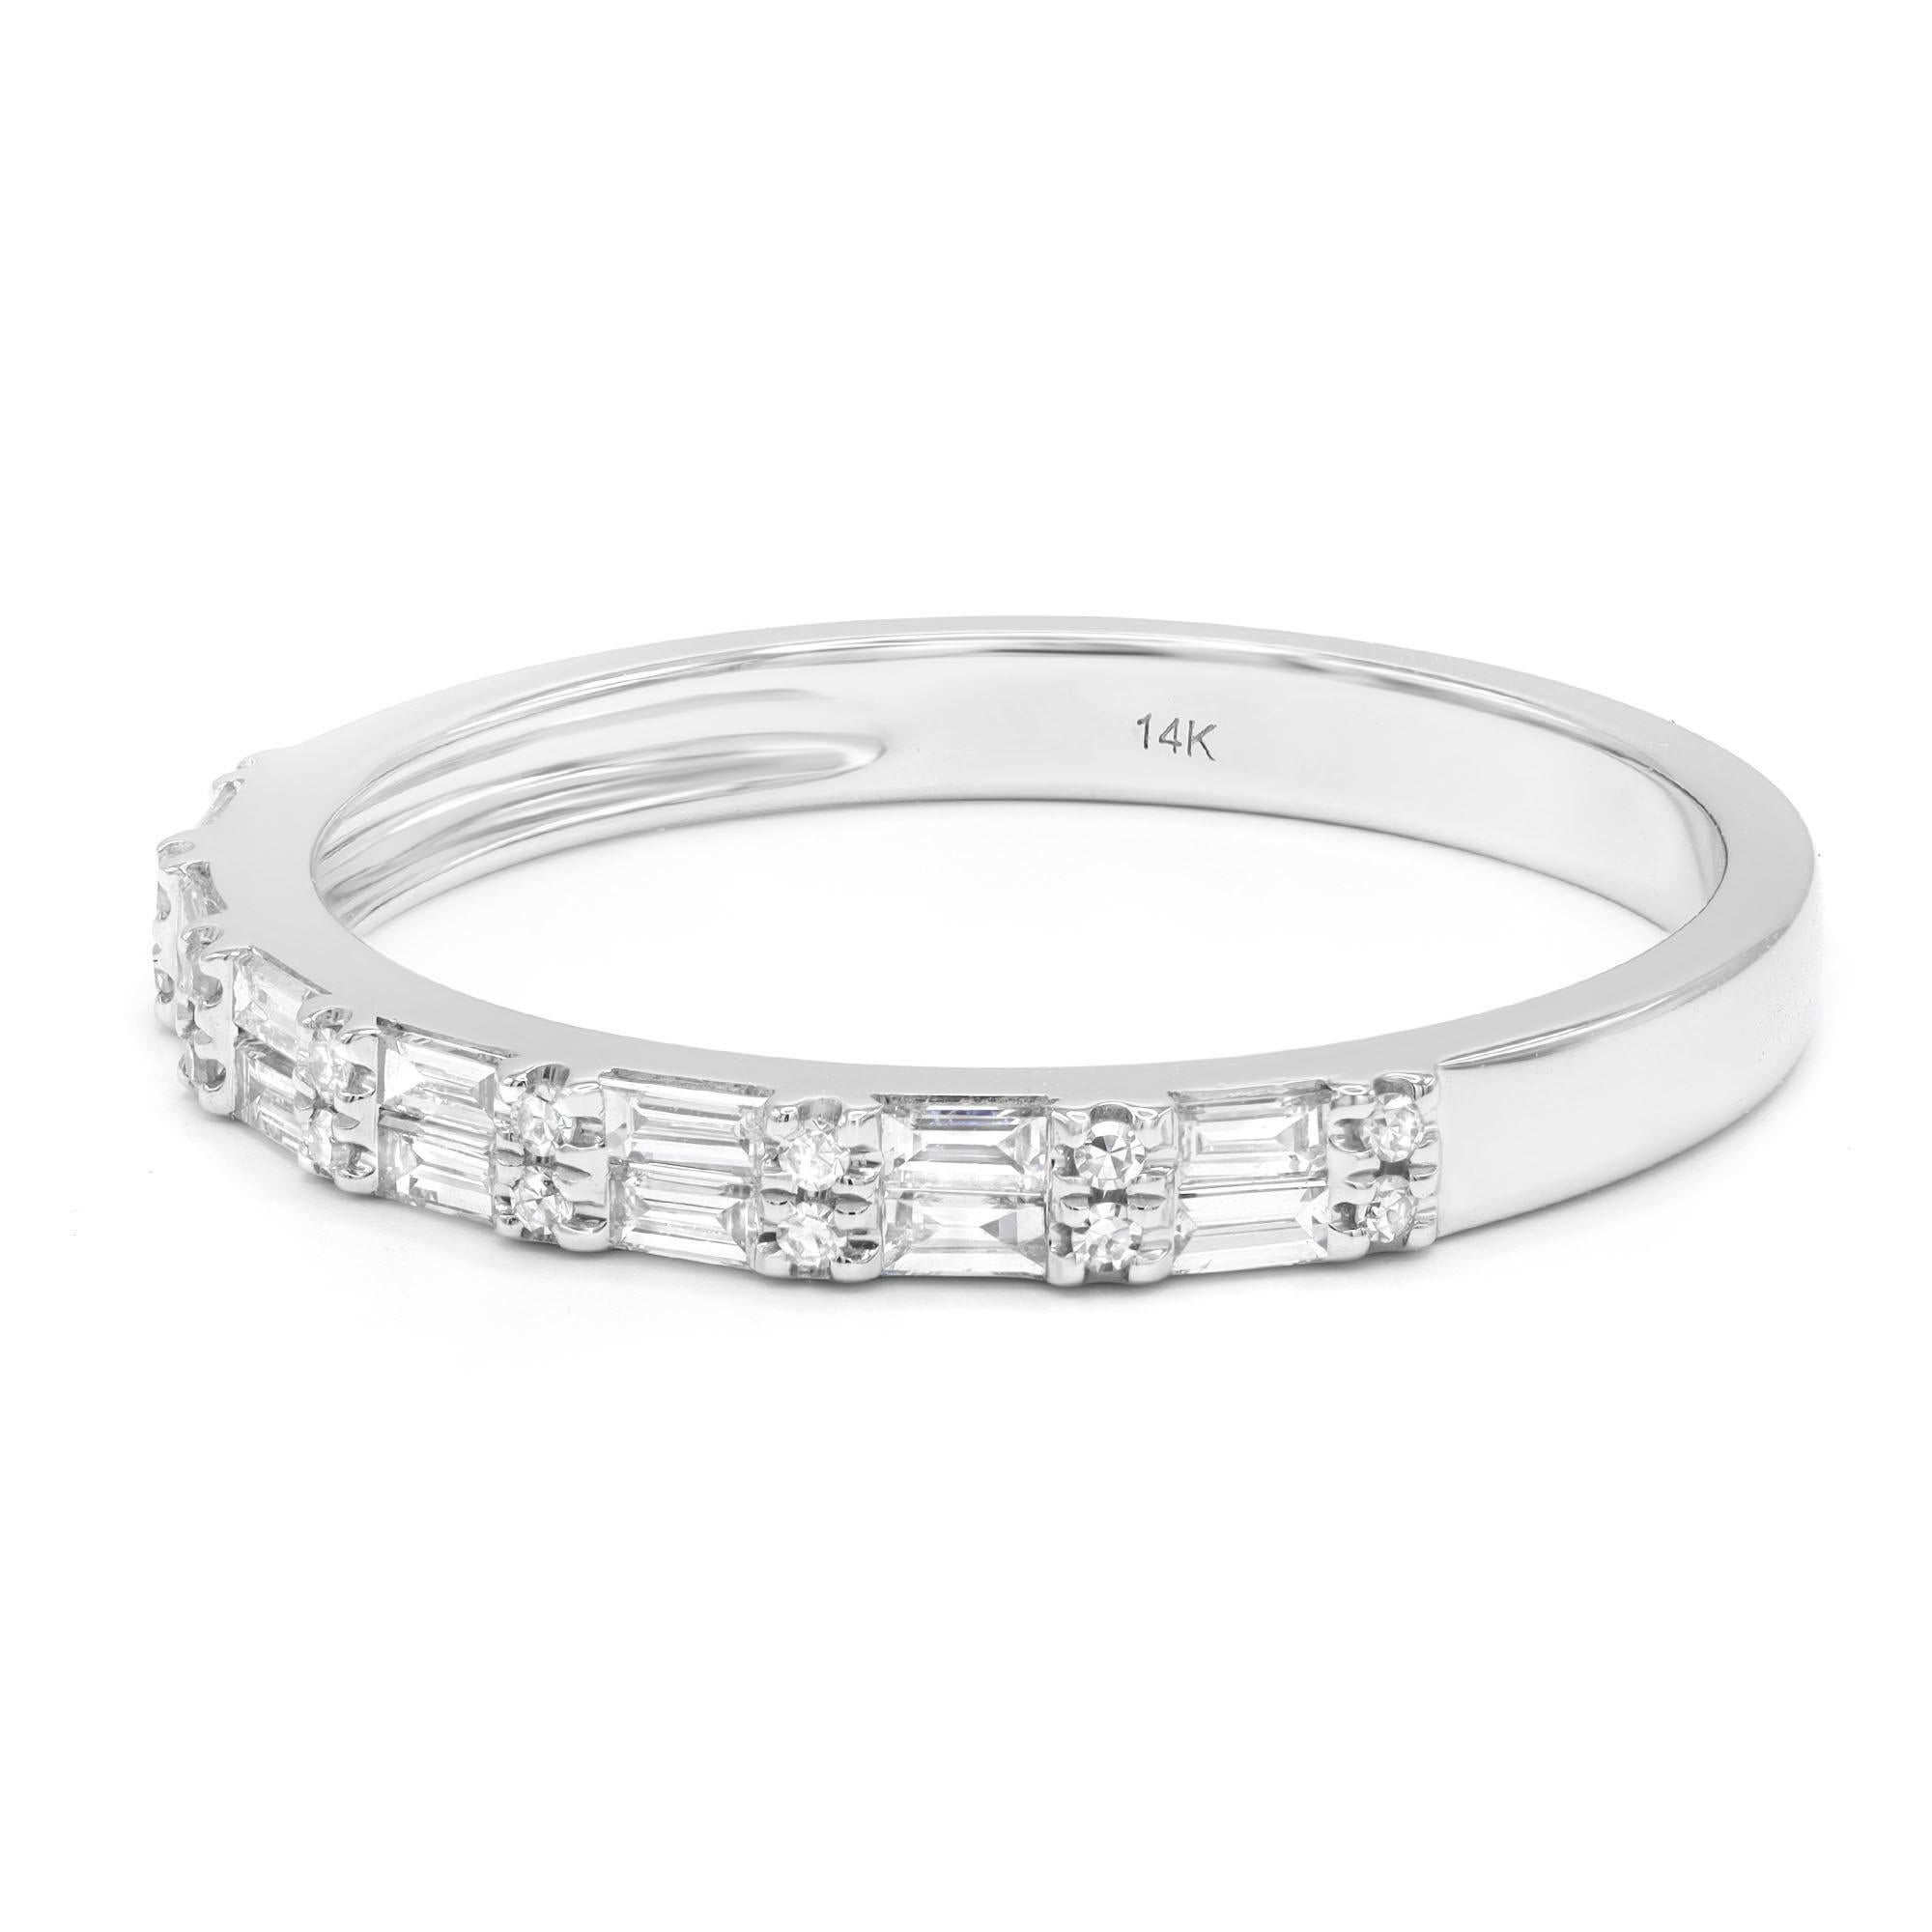 This beautiful diamond wedding band ring is a perfect fit for any occasion. Crafted in 14K white gold, set with baguette and round cut diamonds weighing 0.35cttw. Diamond color G-H and VS-SI clarity. Stackable and easy to mix and match. Ring size